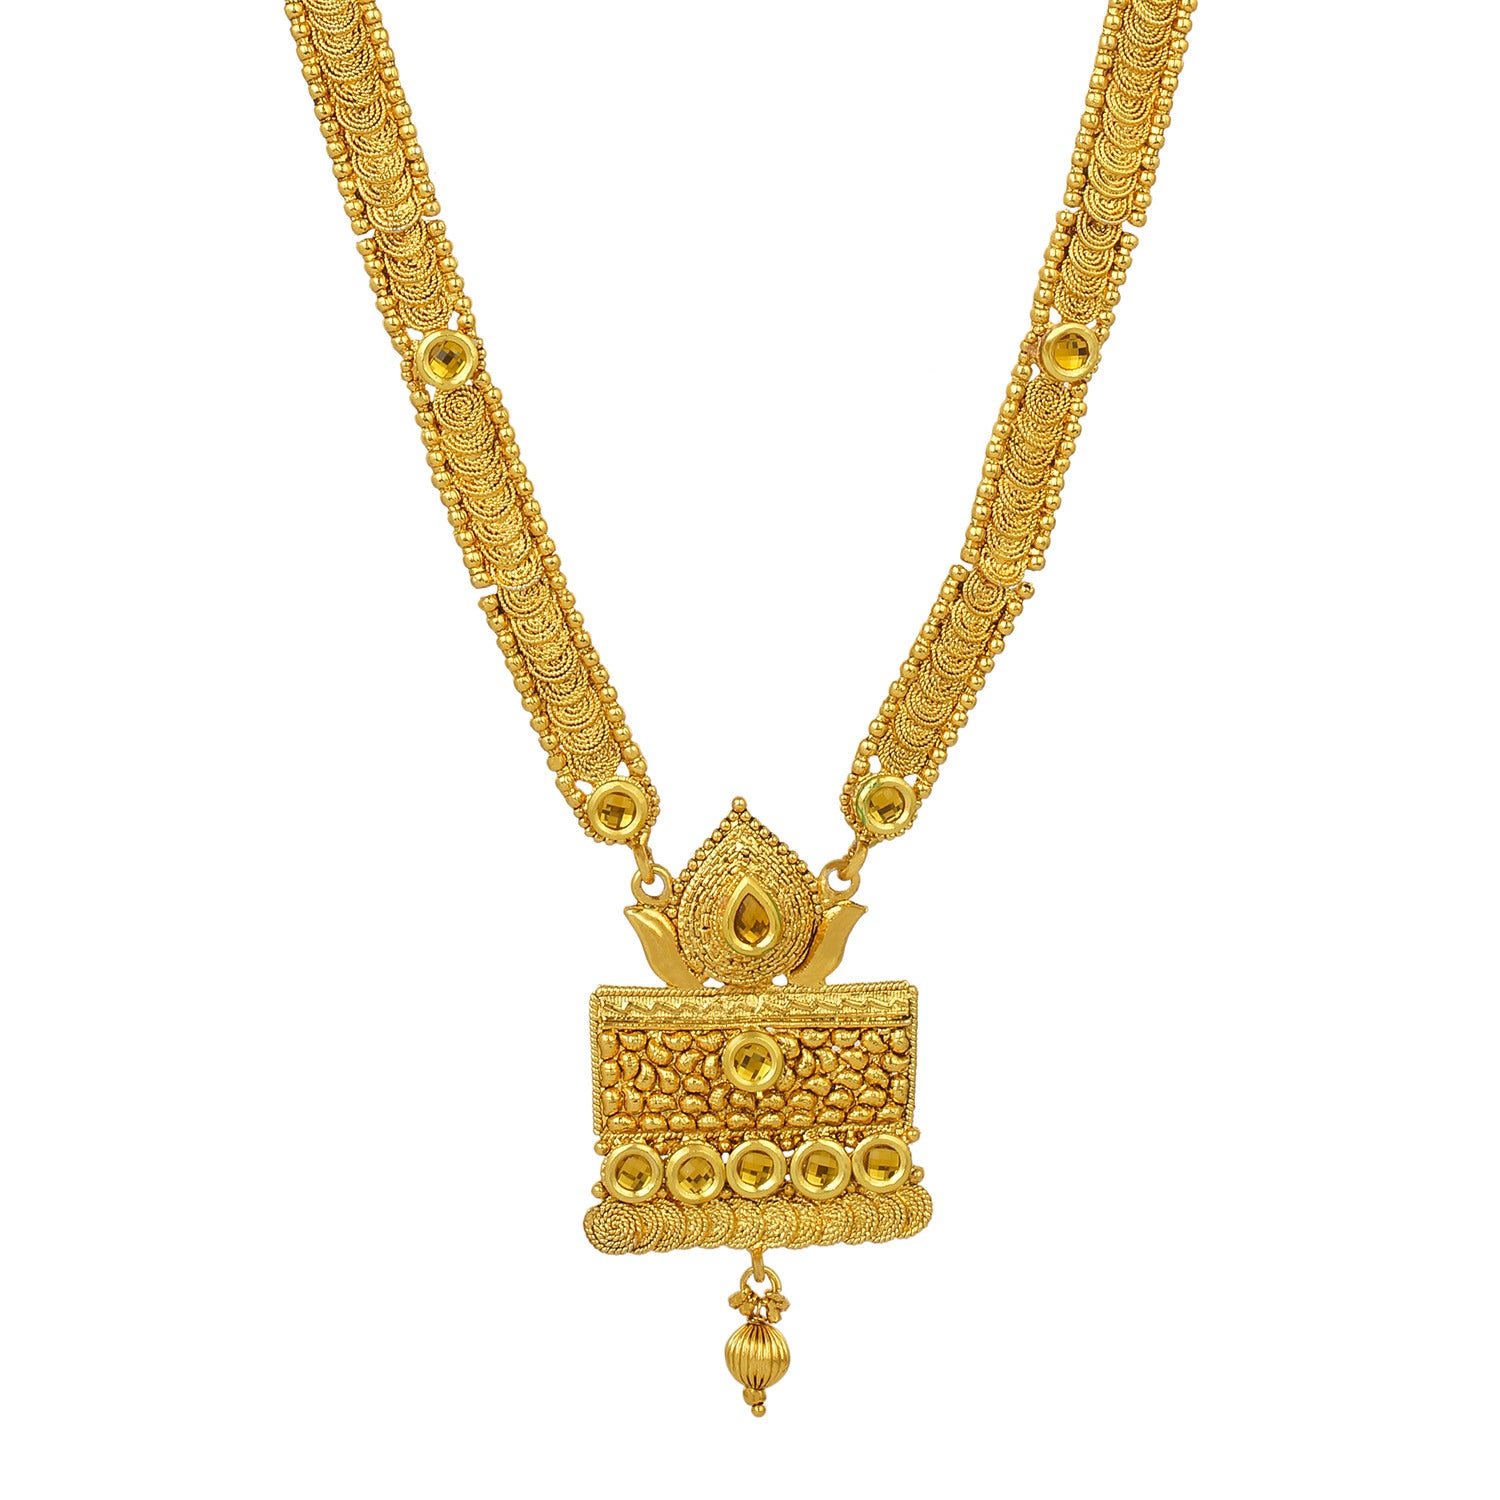 Gold Plated Traditional Long Kundan Necklace and Jhumki Earrings Fashion Jewelry Set for Women and Girls